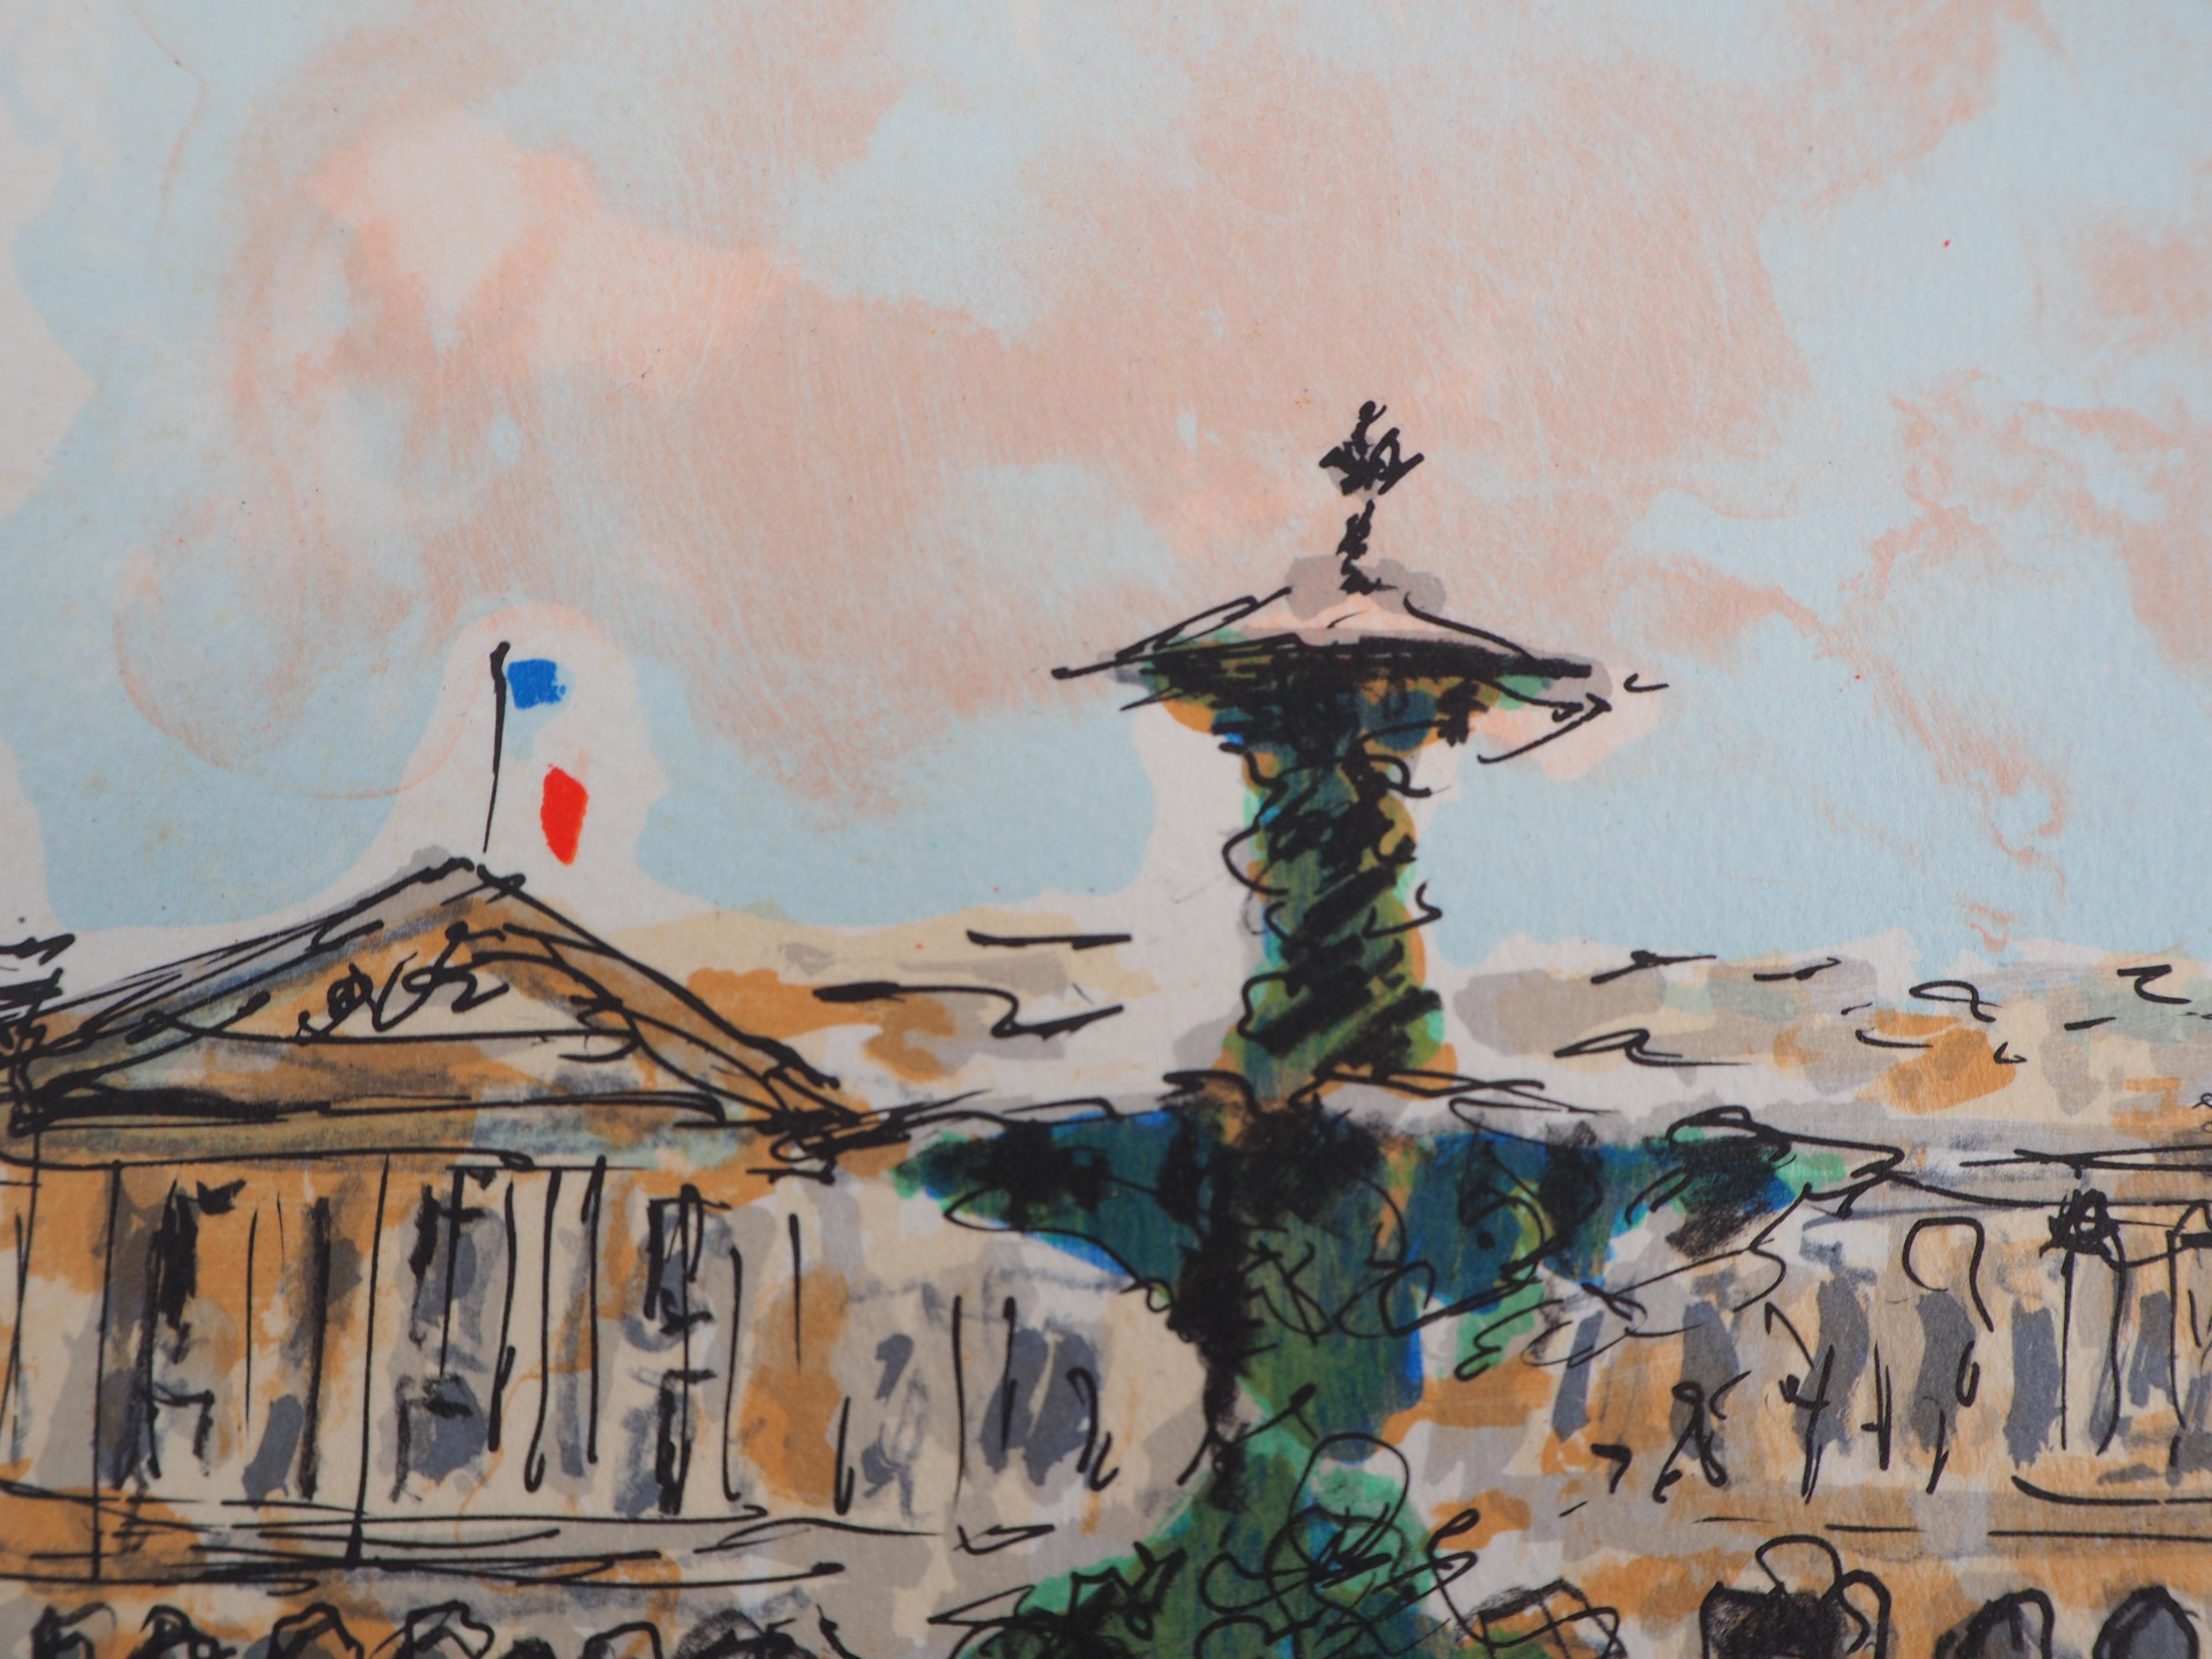 Paris : Concorde Square and American Embassy - Original Lithograph Handsigned  - Modern Print by Urbain Huchet